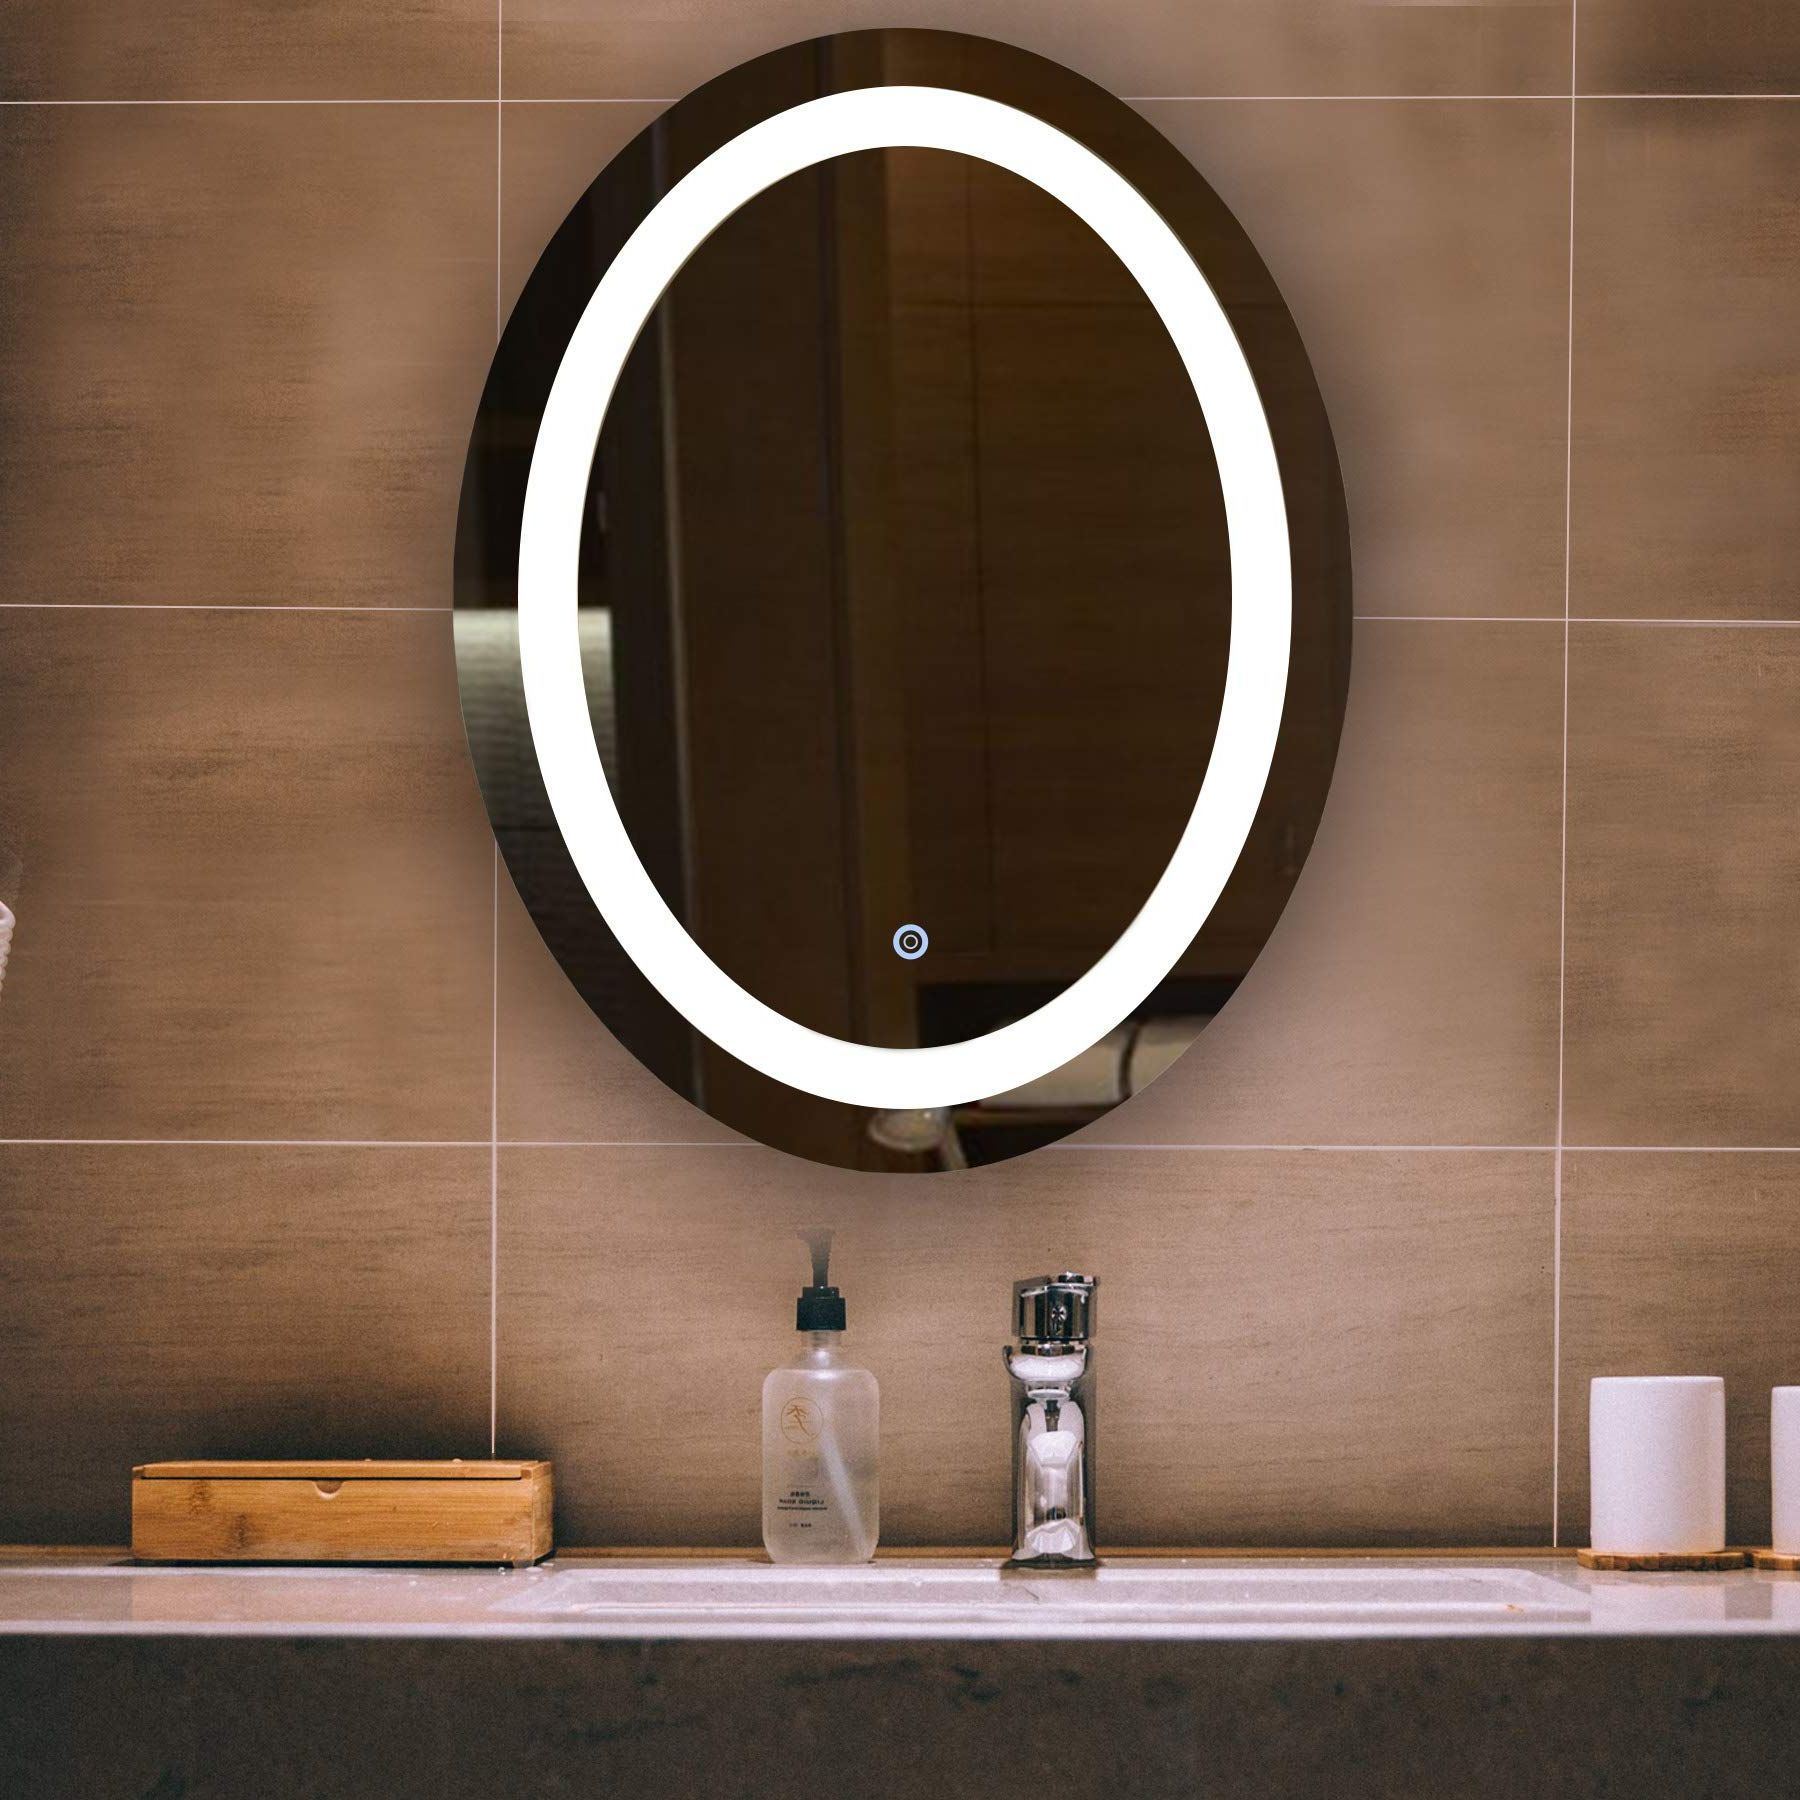 Oval Frameless Led Wall Mirrors Intended For Latest Co Z Dimmable Oval Led Bathroom Mirror — To View Further For This Item (View 1 of 15)